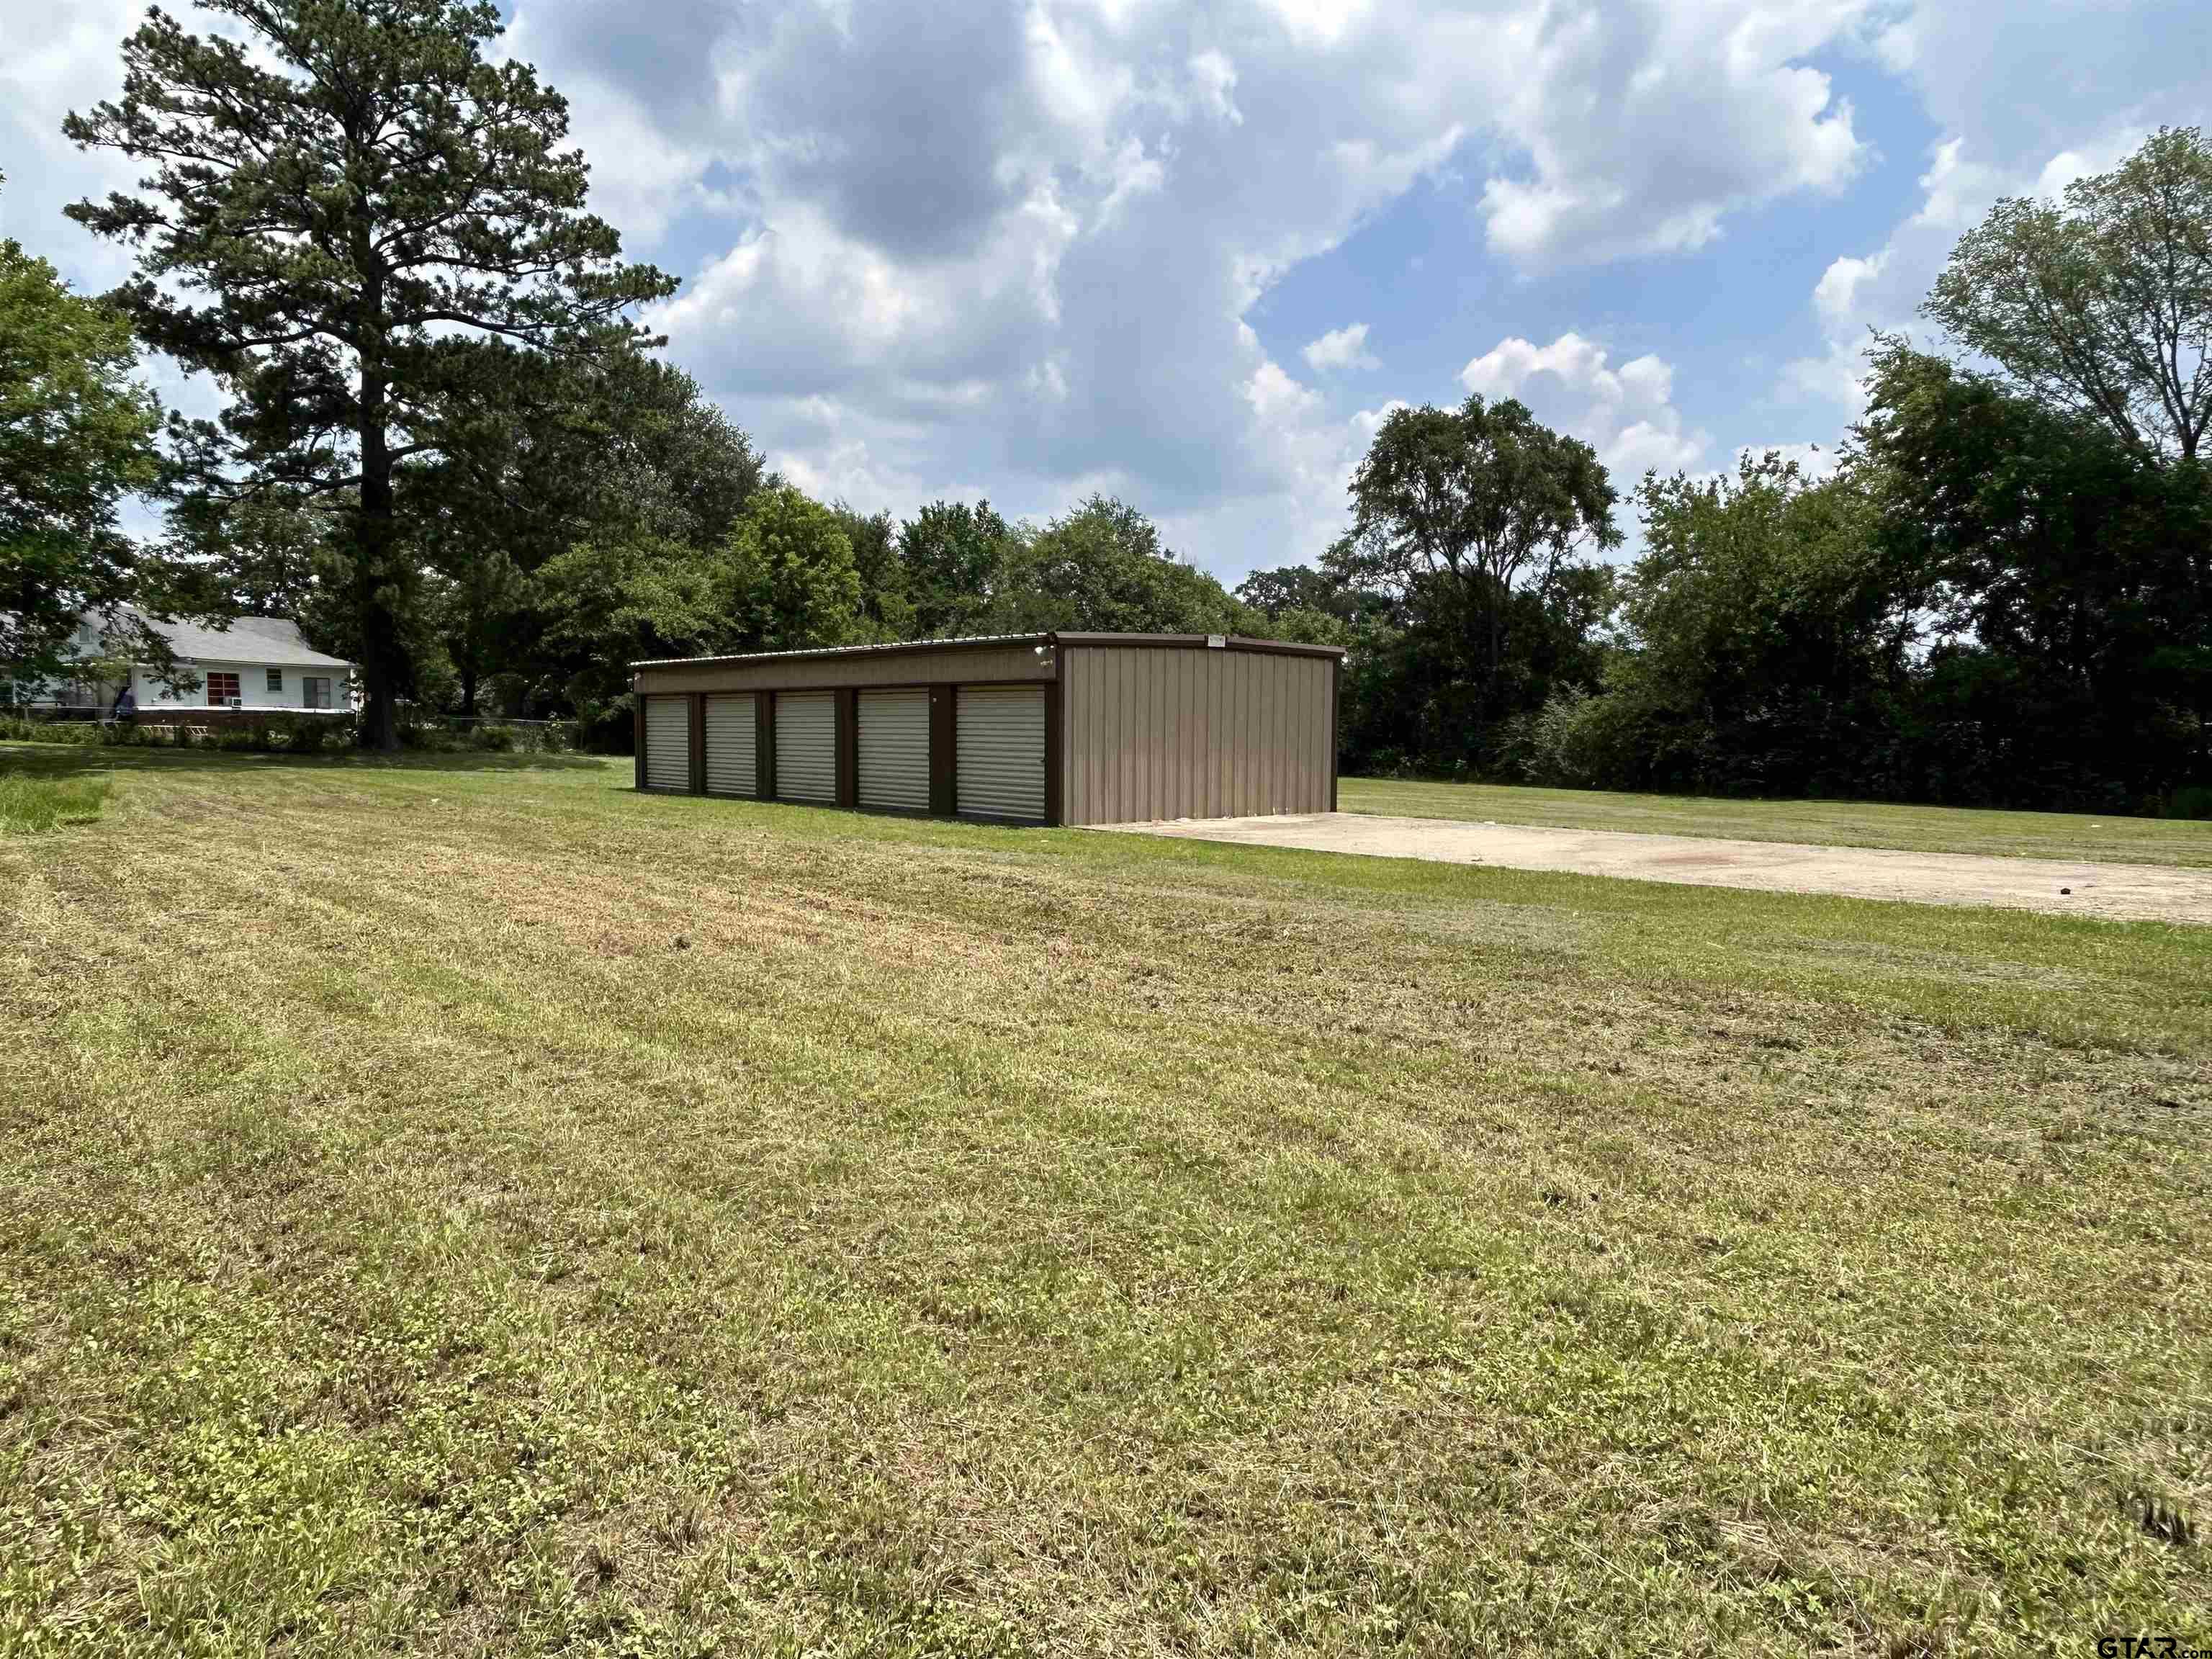 304 US Hwy 287 S, Elkhart, Texas 75839, ,Building,For Sale,US Hwy 287 S,23007256